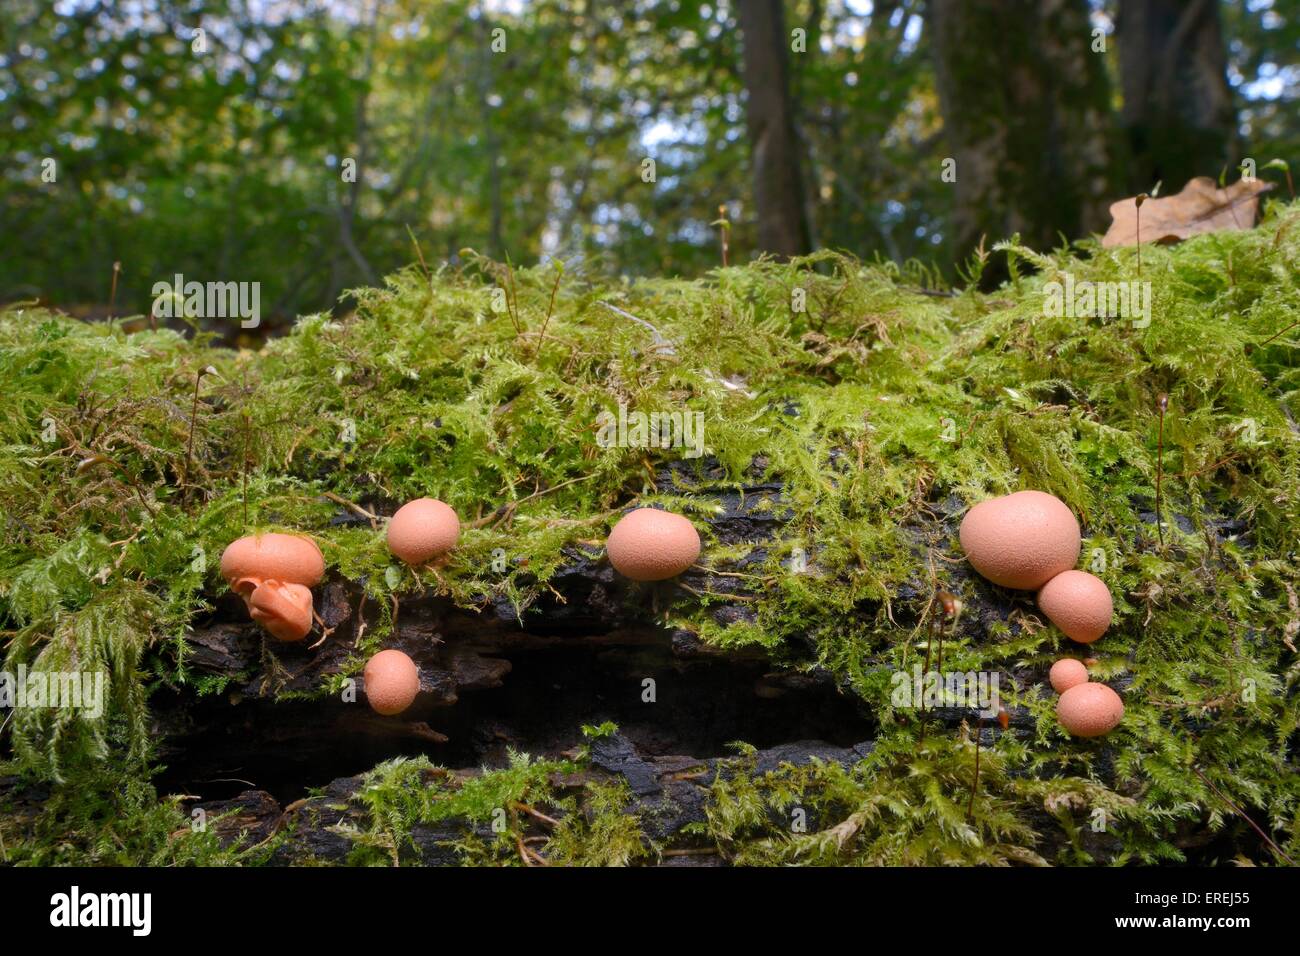 Wolf's milk slime balls (Lycogale terrestre), the spore forming reproductive phase of this slime mould, on a mossy log. Stock Photo